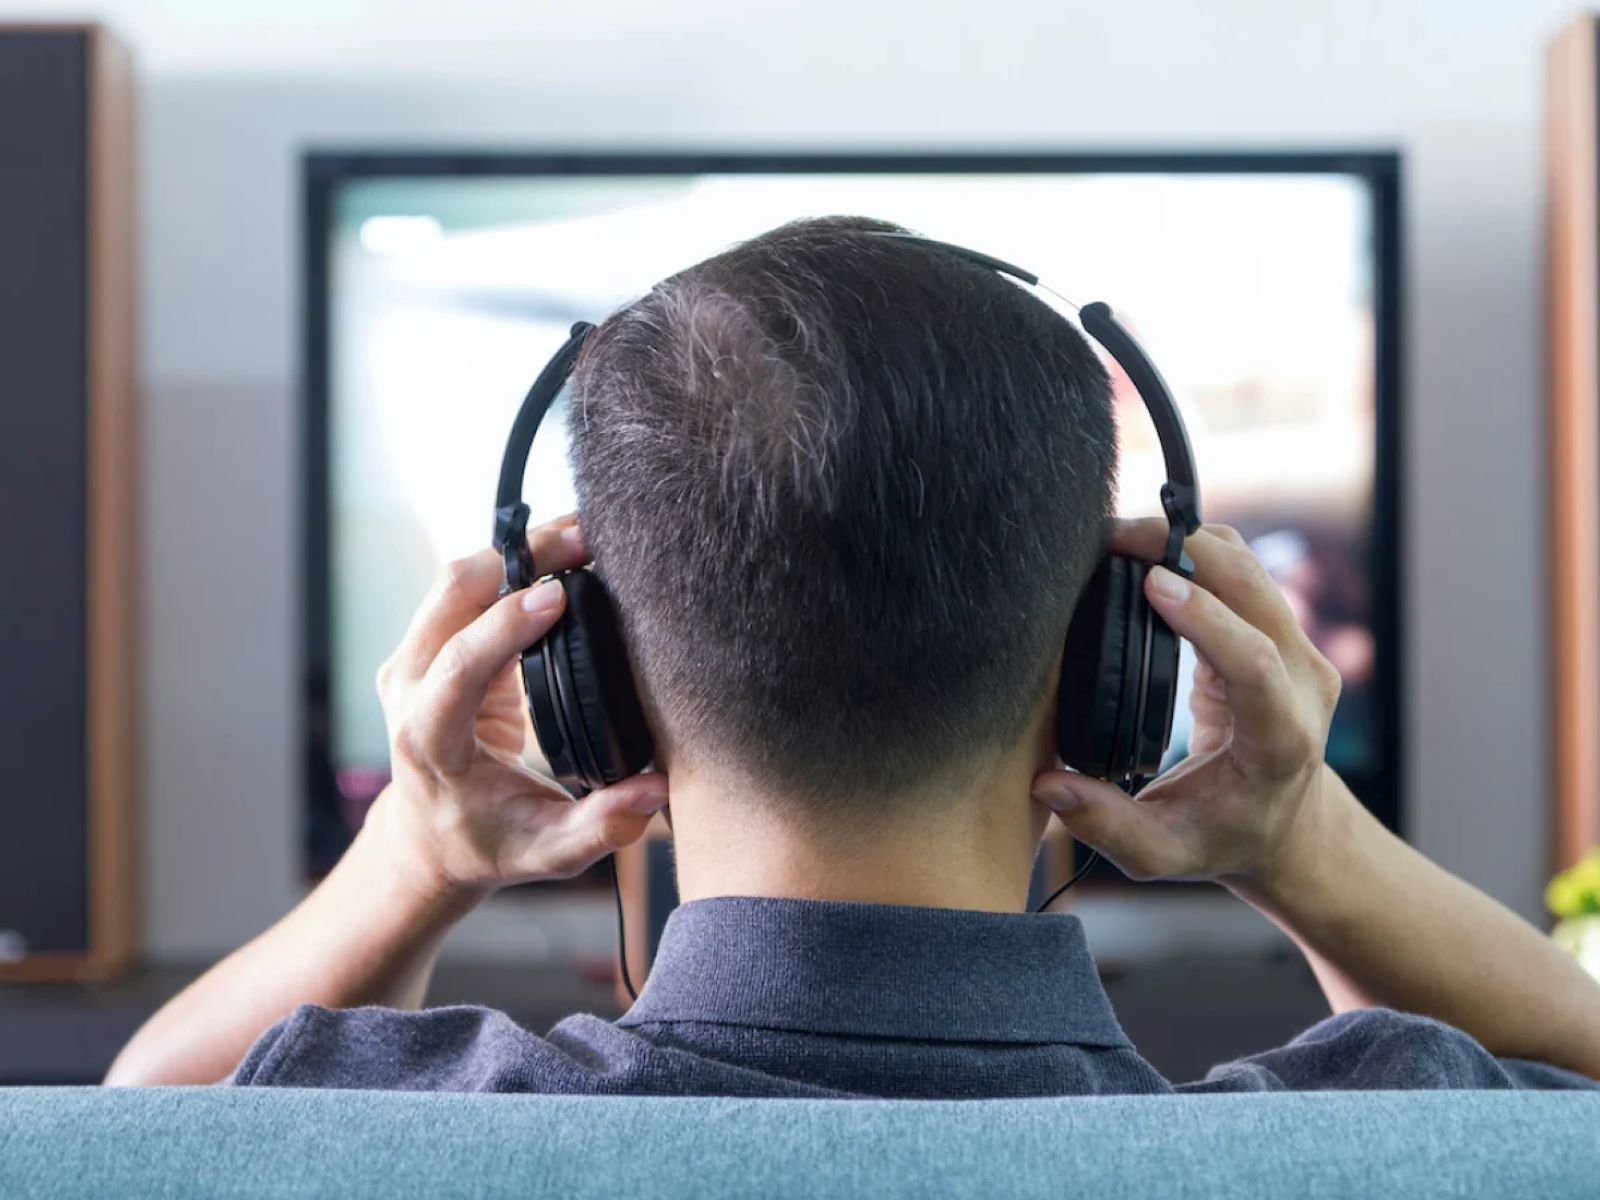 How To Watch TV With Bluetooth Headphones